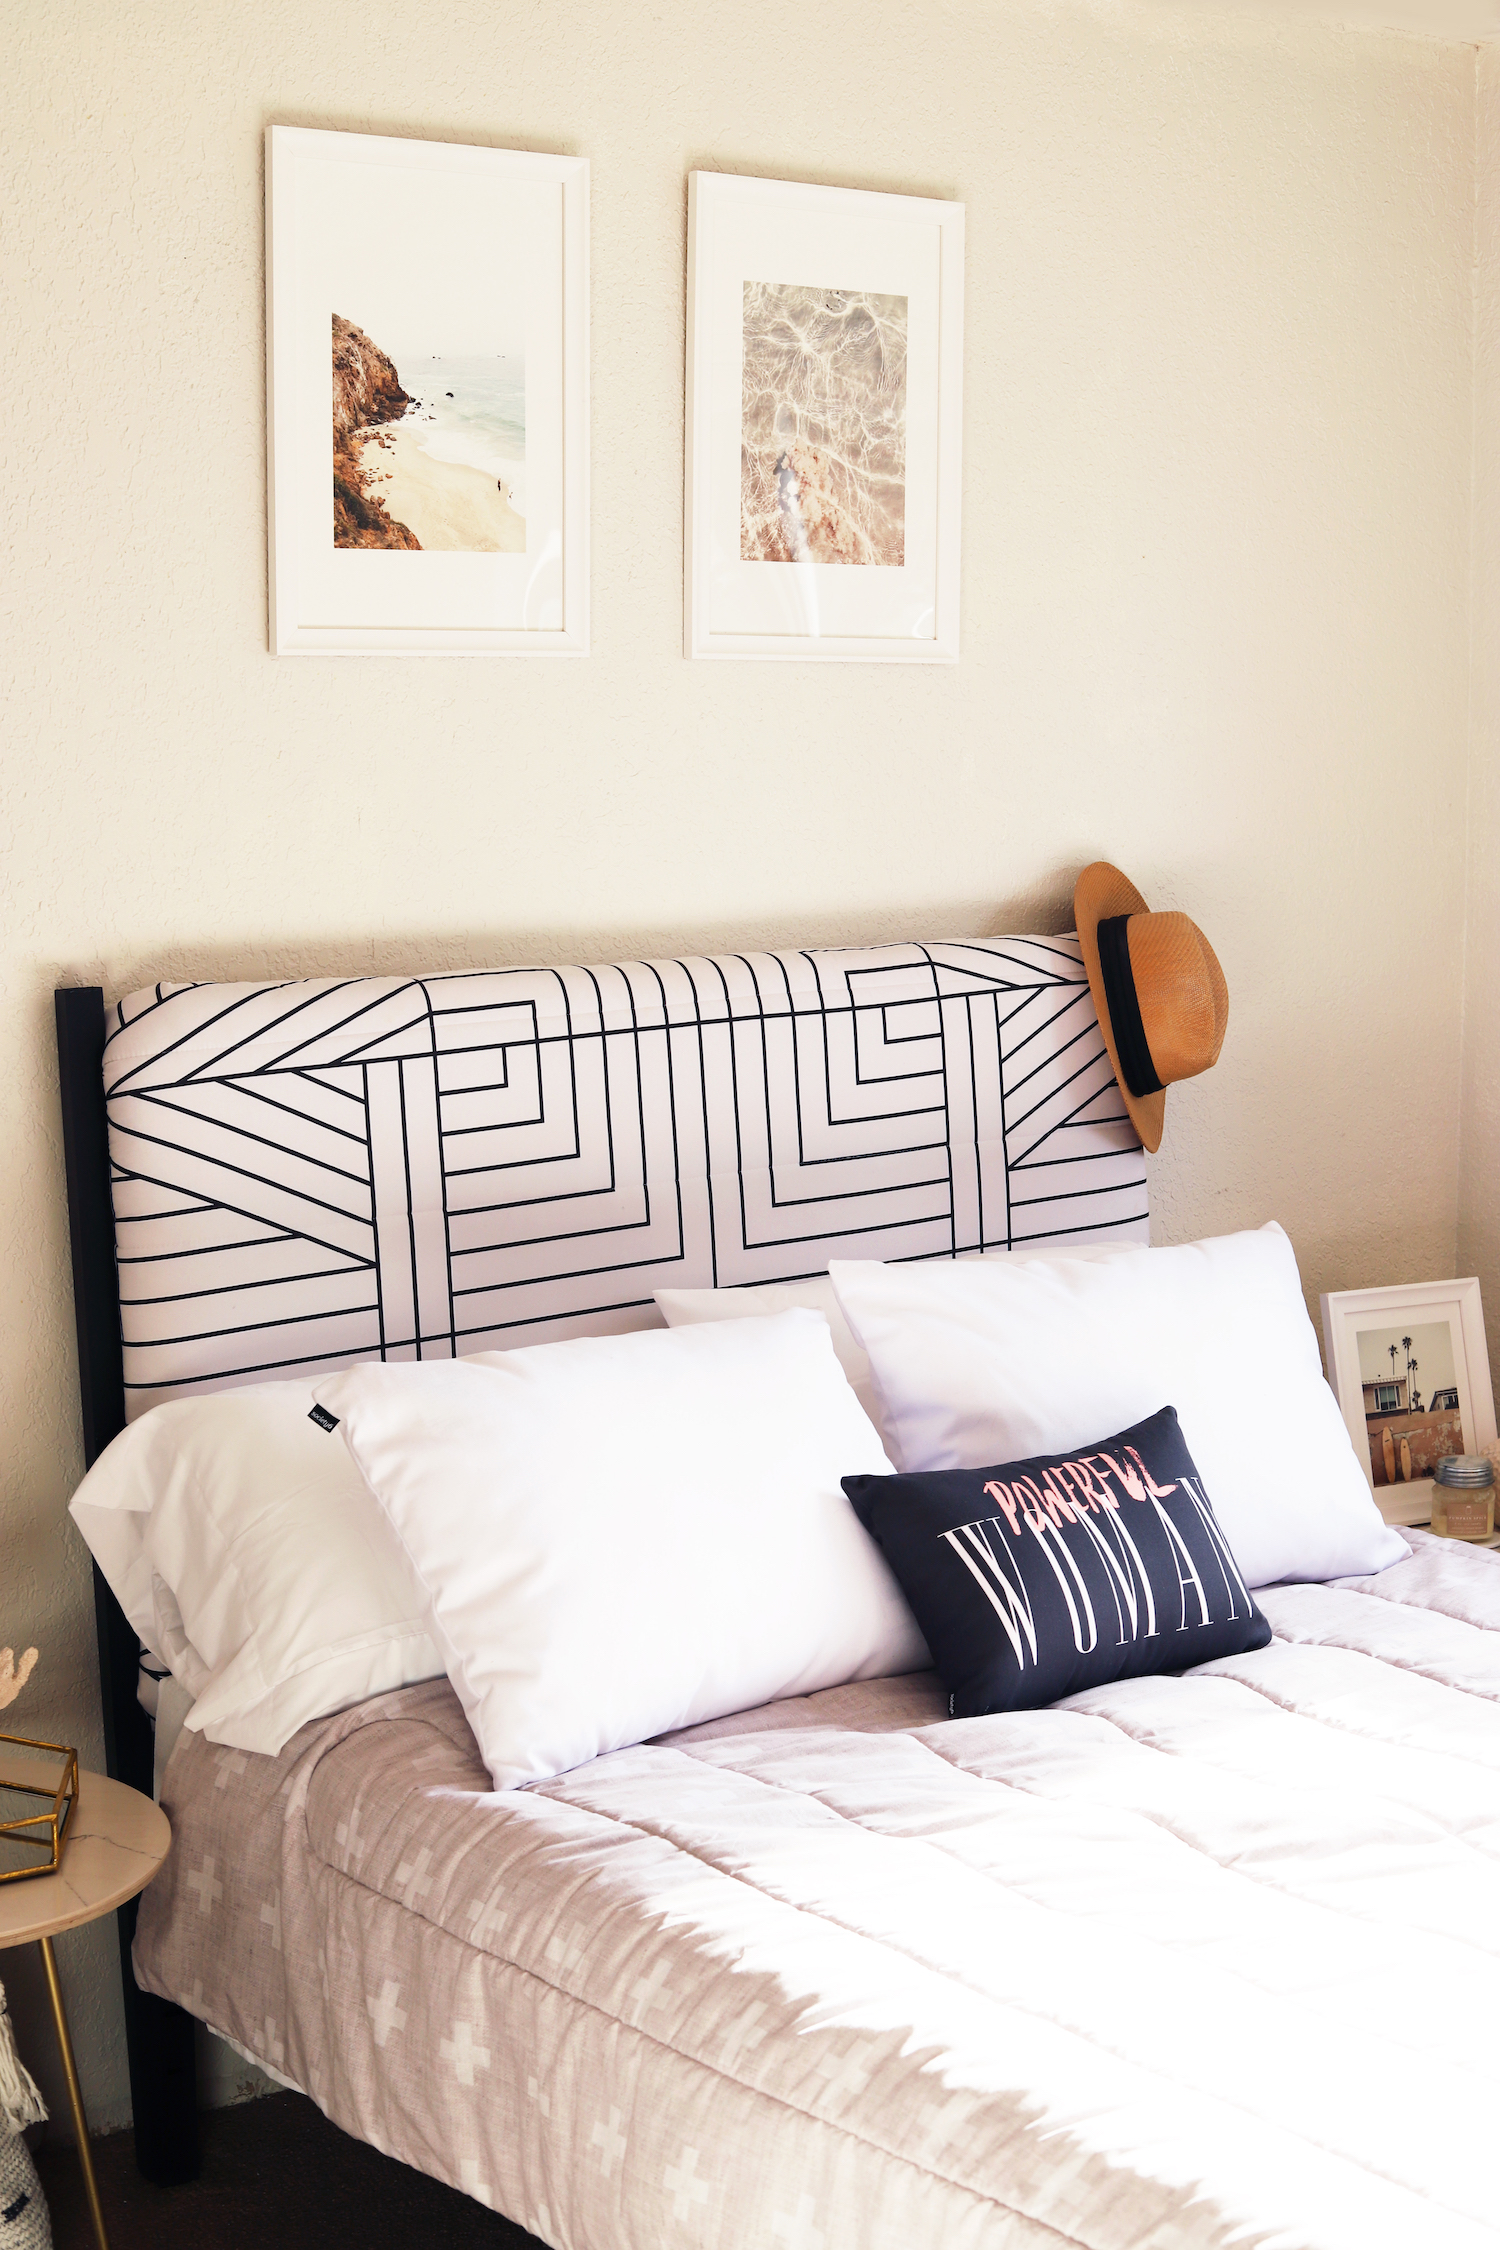 This Diy Upholstered Headboard Will Up